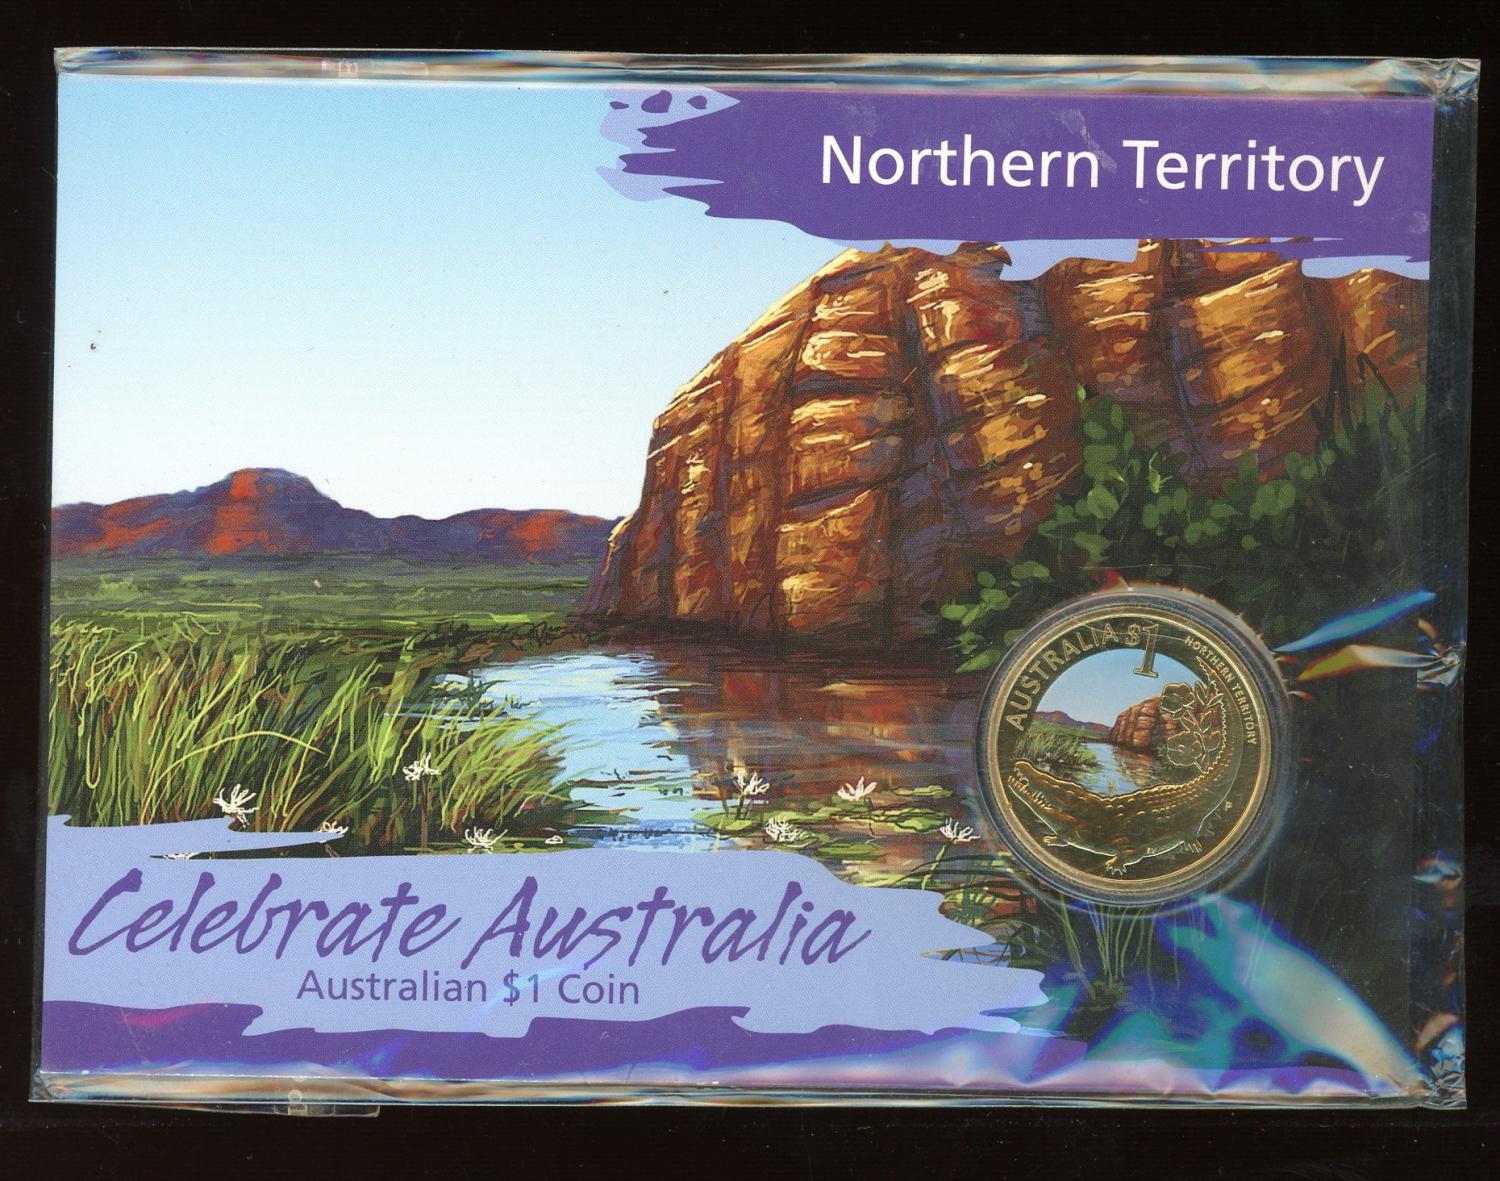 Thumbnail for 2009 Celebrate Australia Coloured Uncirculated $1 Coin - Northern Territory